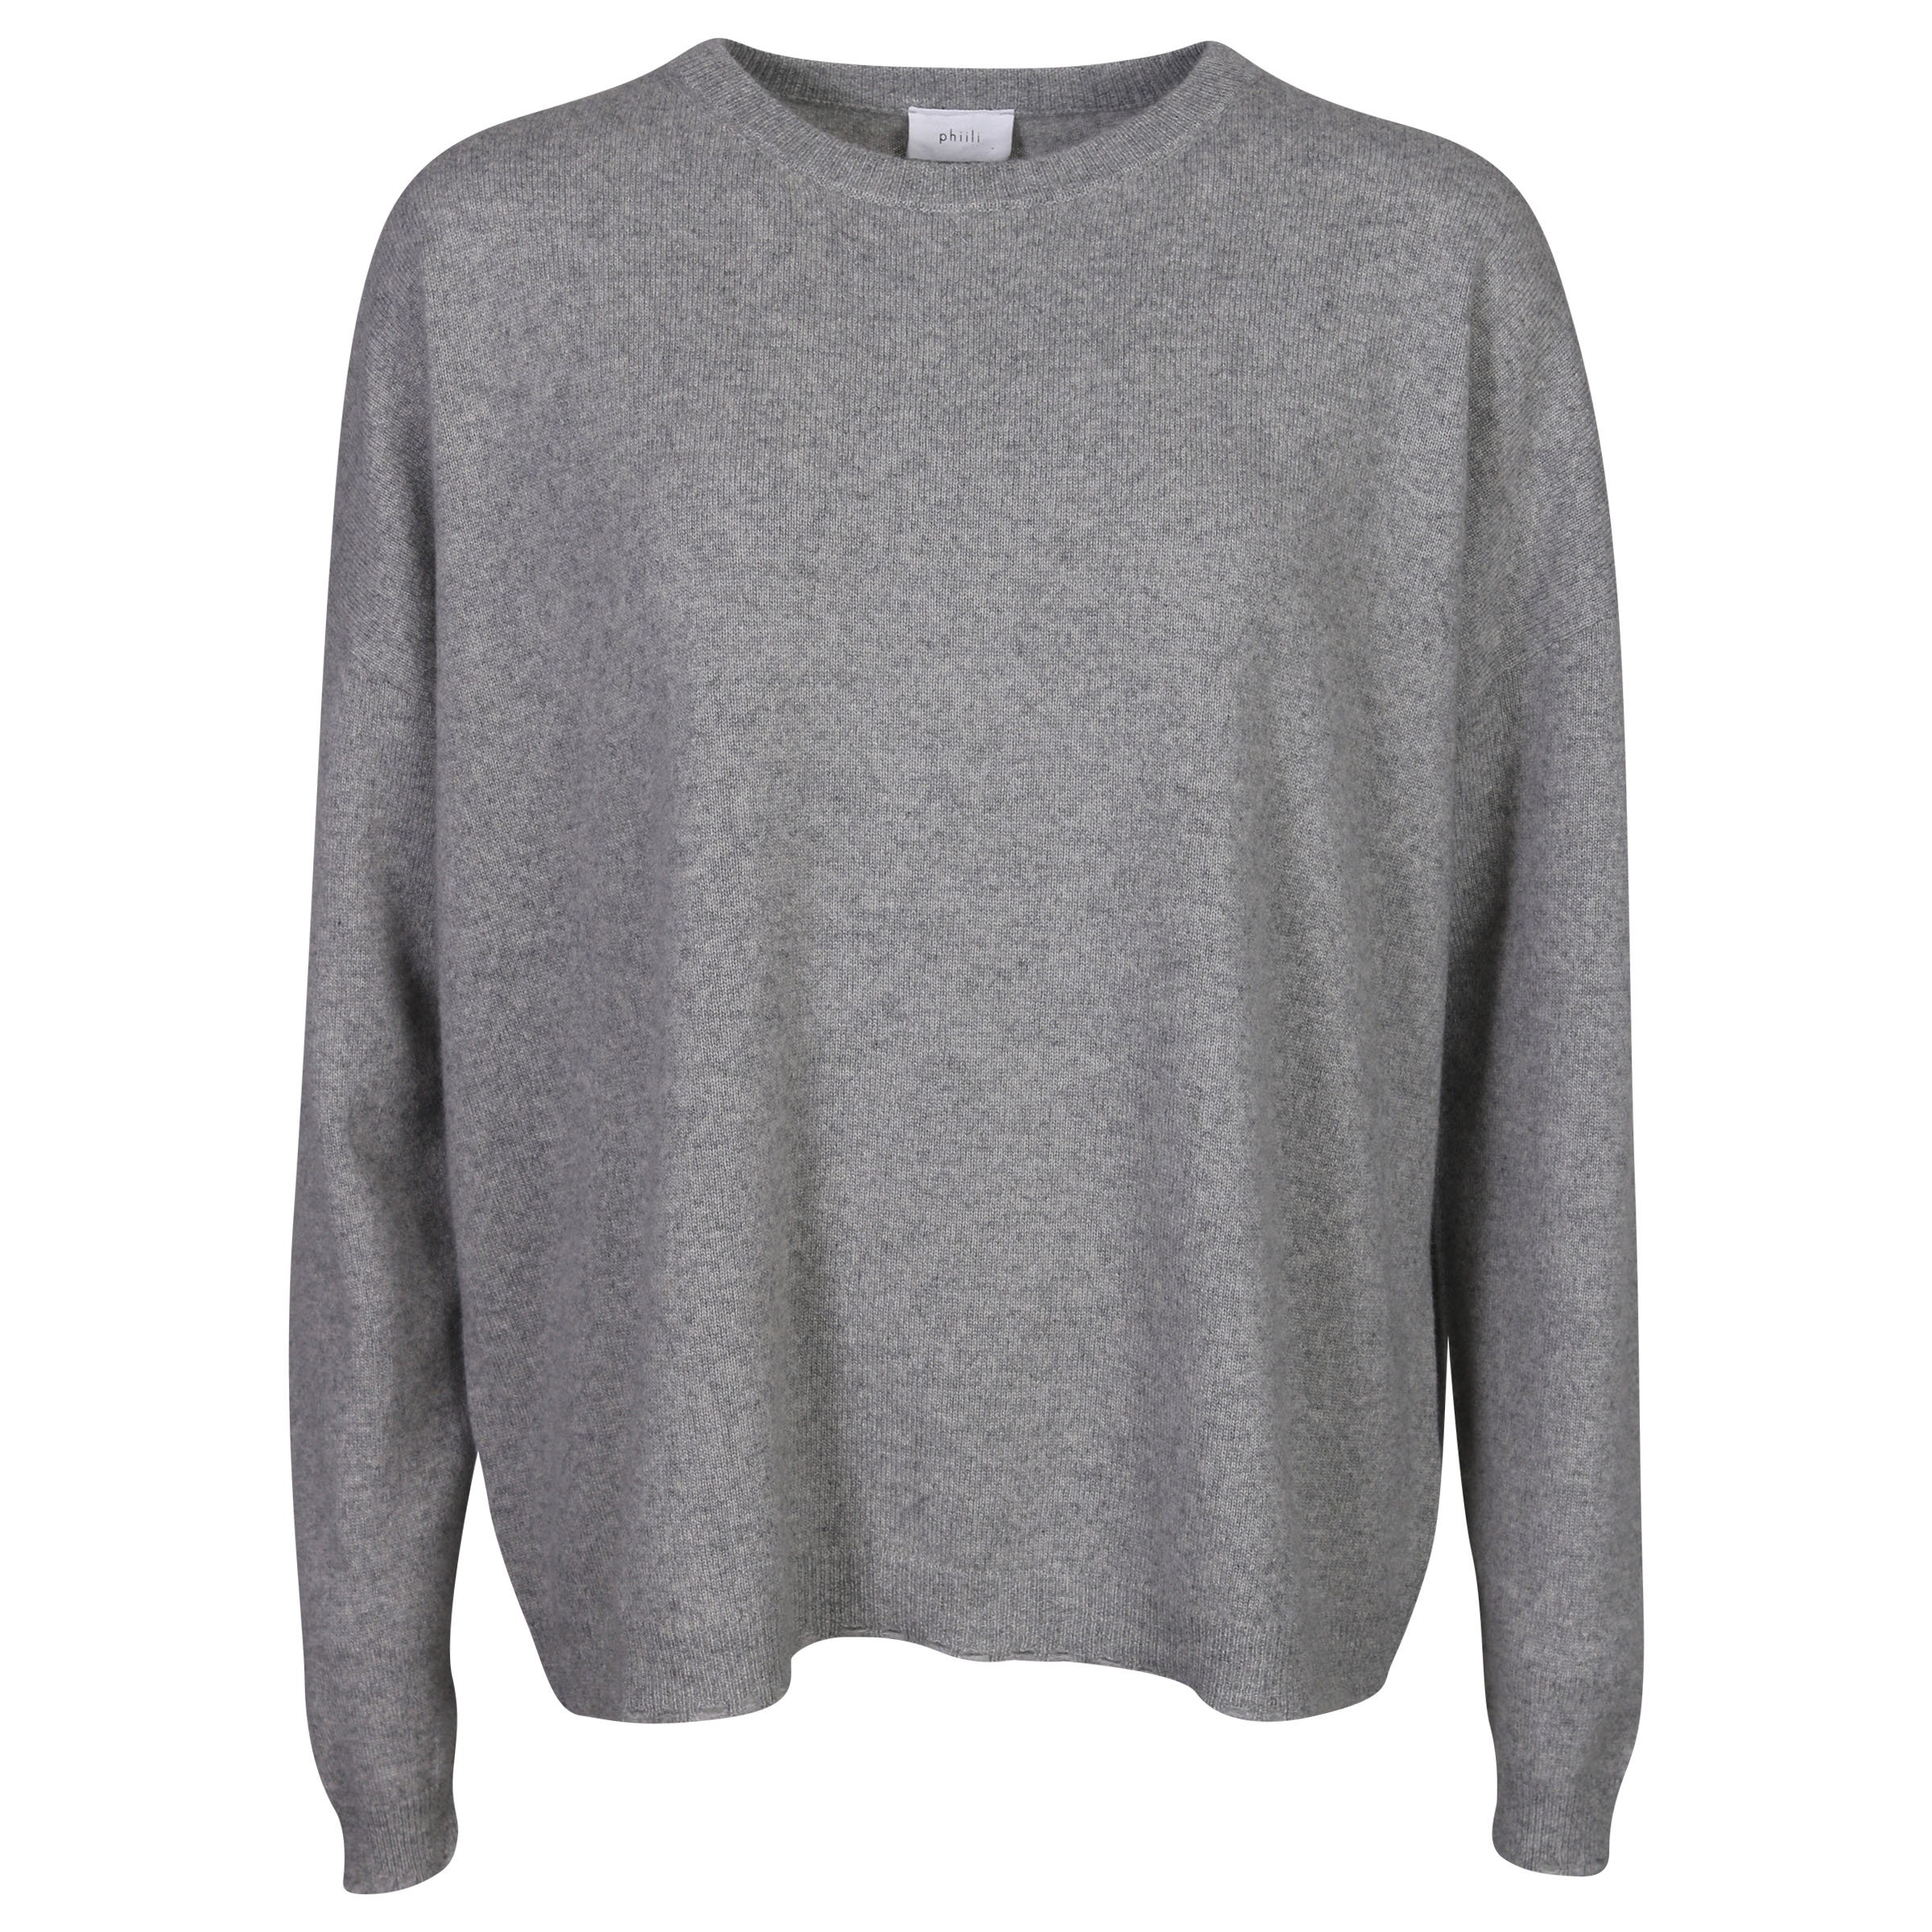 Phiili Recycled Cashmere Sweater in Grey XS/S